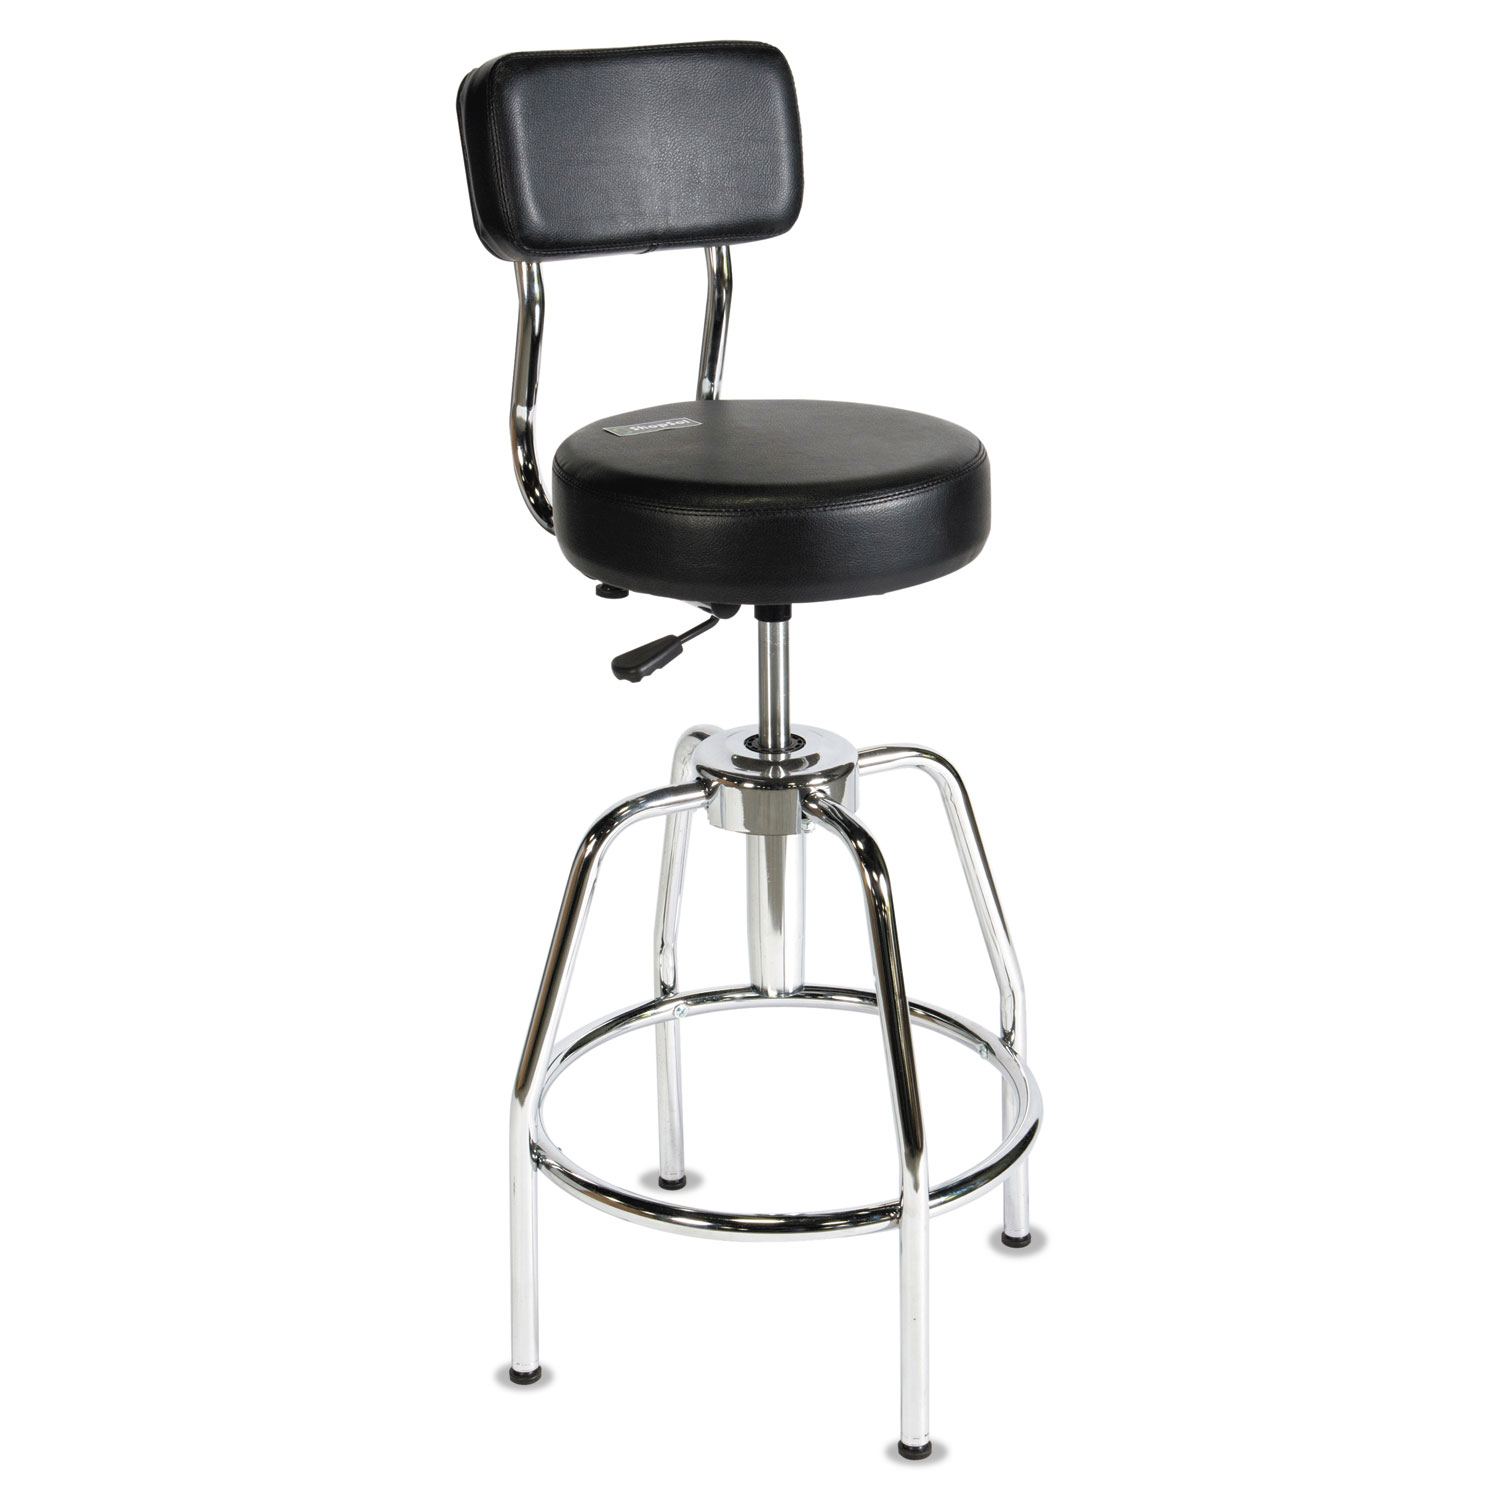 Heavy-Duty Shop Stool, 34 Seat Height, Supports up to 300 lbs., Black Seat/Black Back, Chrome Base